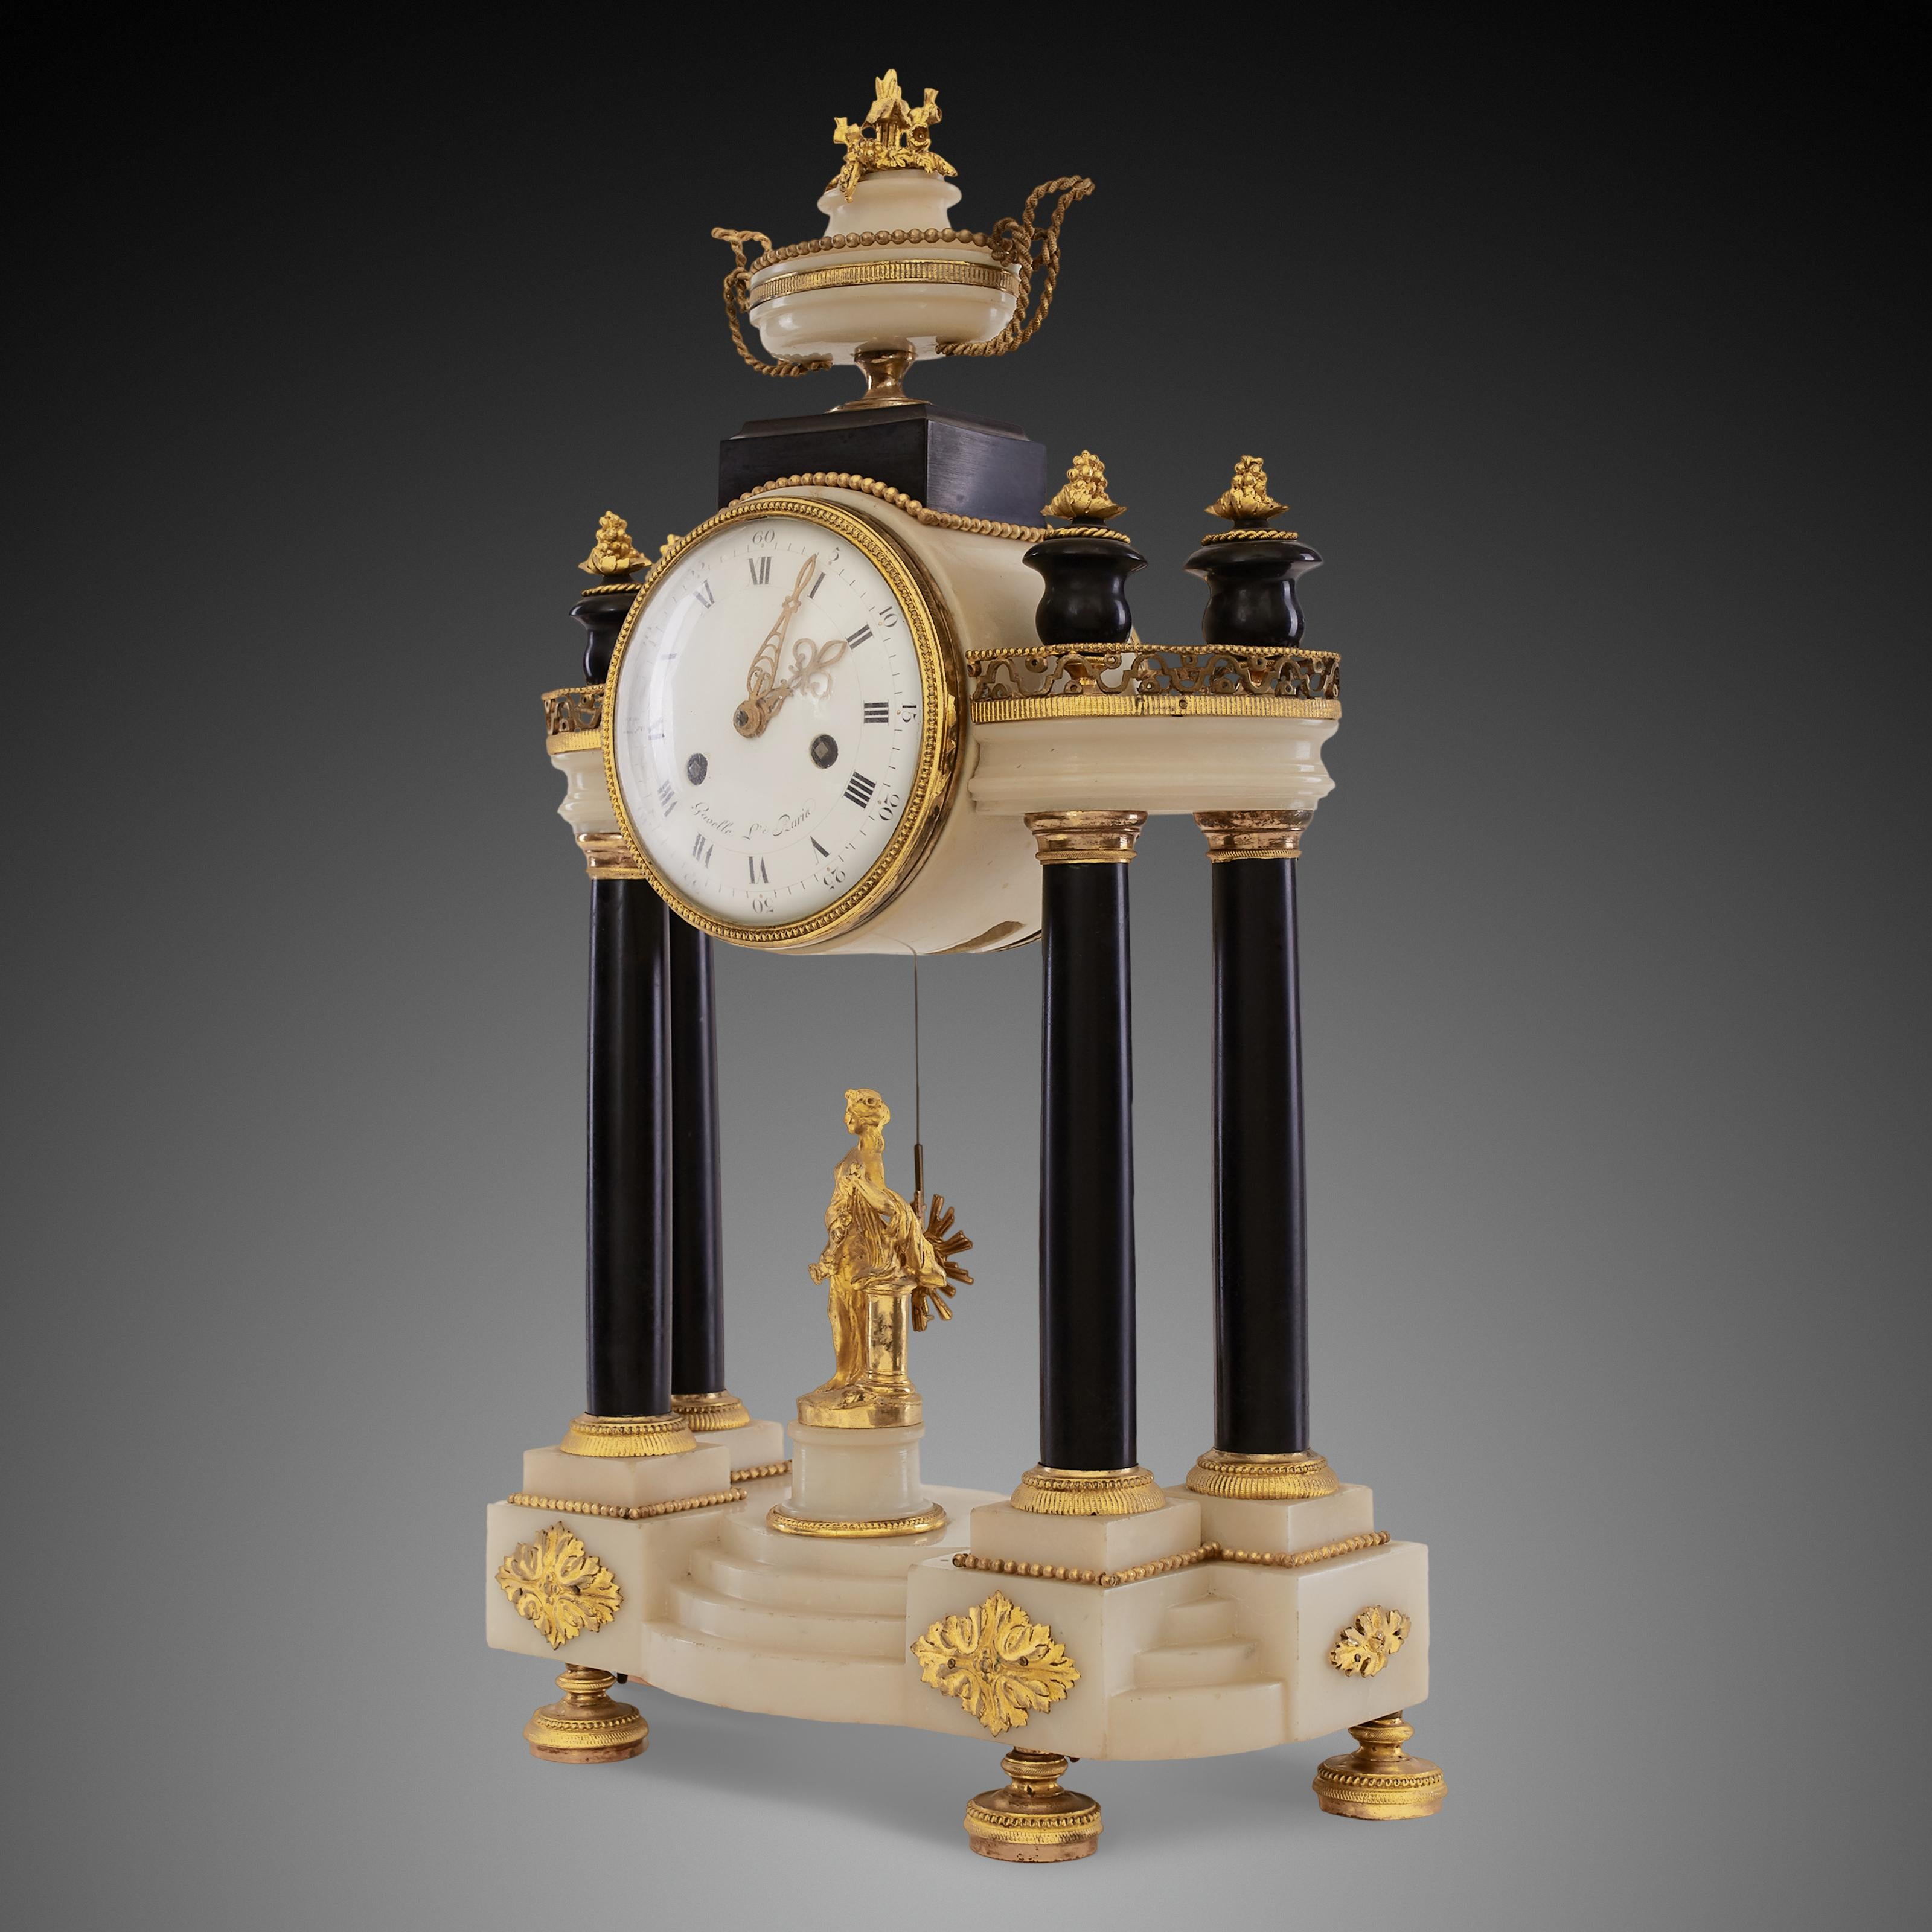 Antique French portico clock is crafted in Empire style during the reign of Napoleon in the 19th century. The Empire style gives the antique clock symmetry on either side. When observed closely, the two sides of the pedestal are printed with